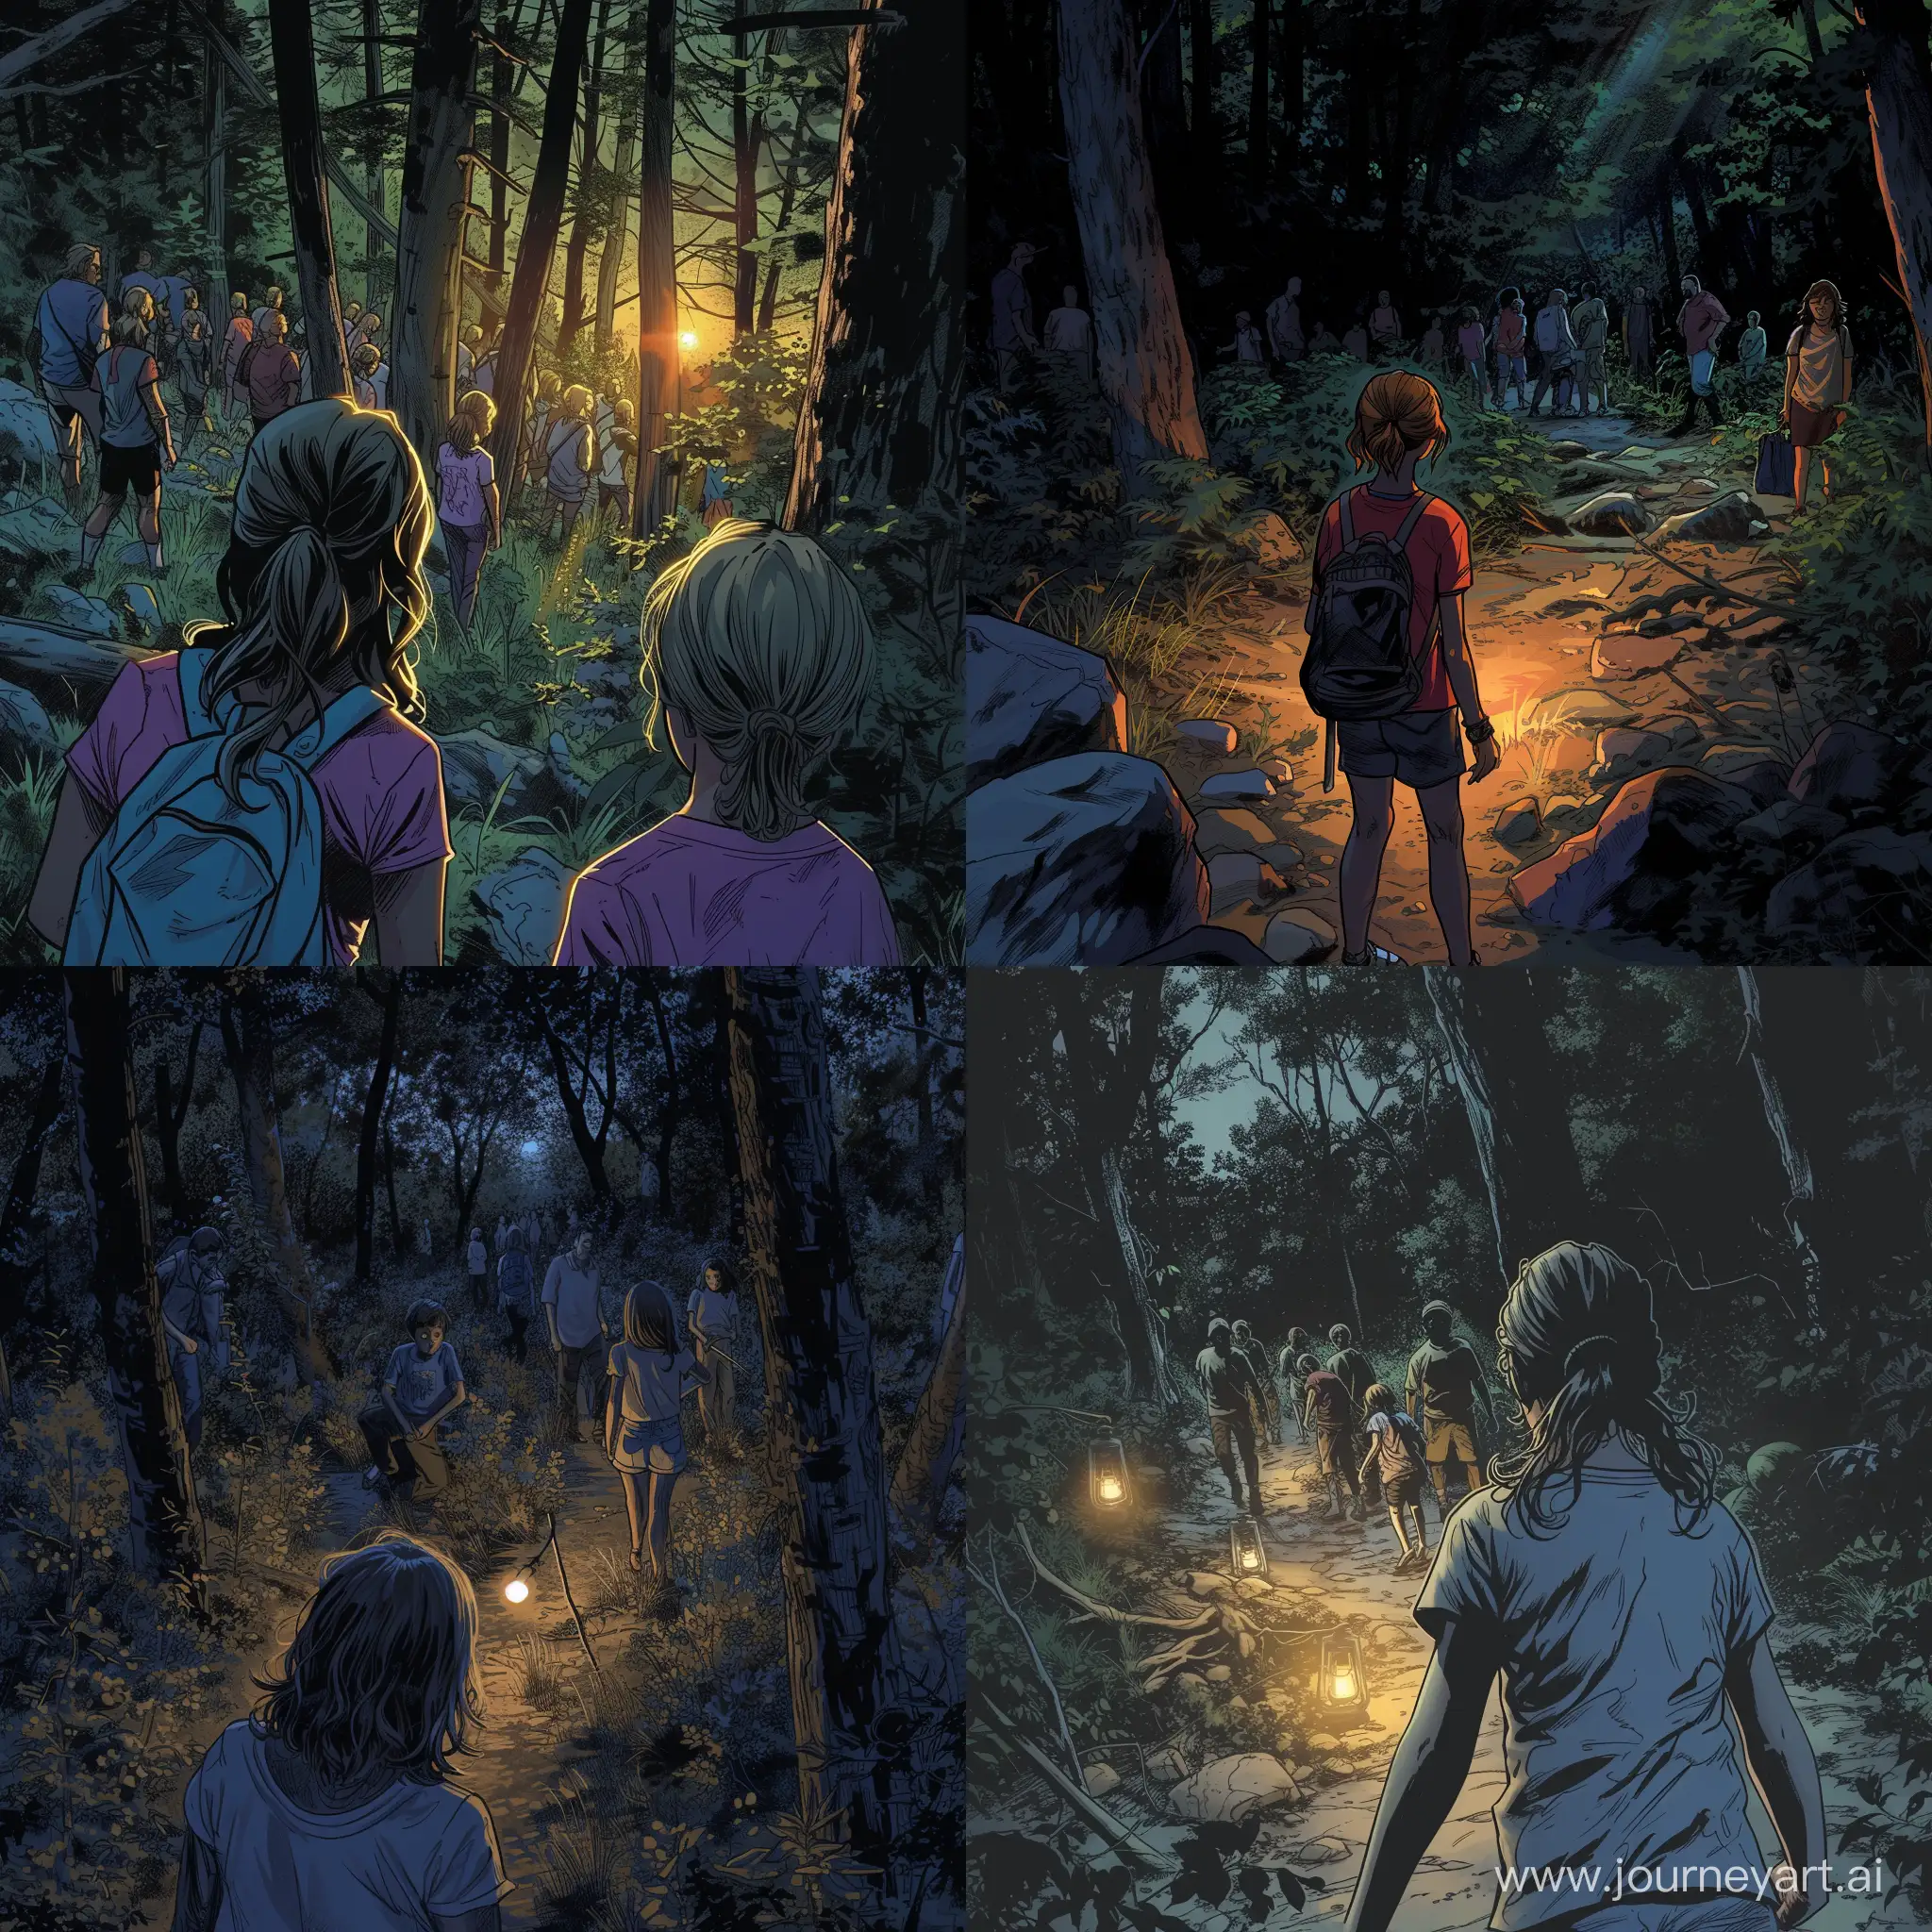 Search-and-Rescue-Mission-in-the-Dark-Woods-Modern-American-Comic-Book-Style